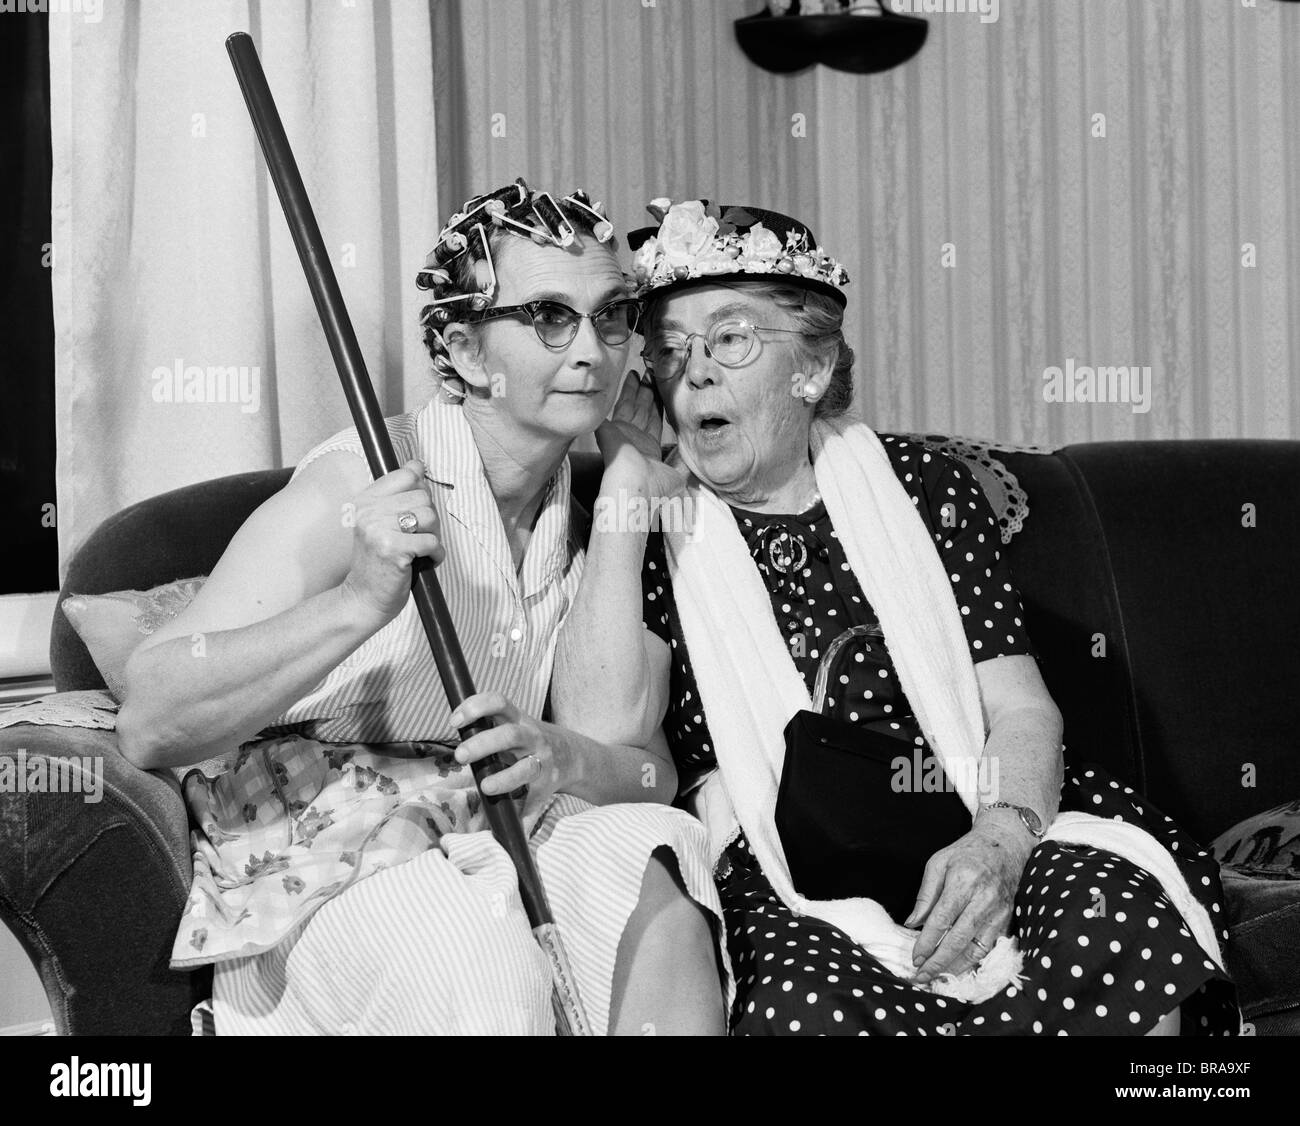 1950s 1960s TWO ELDERLY WOMEN CHARACTERS GOSSIPING ONE WOMAN WITH HAIR CURLERS OTHER WITH HAT Stock Photo